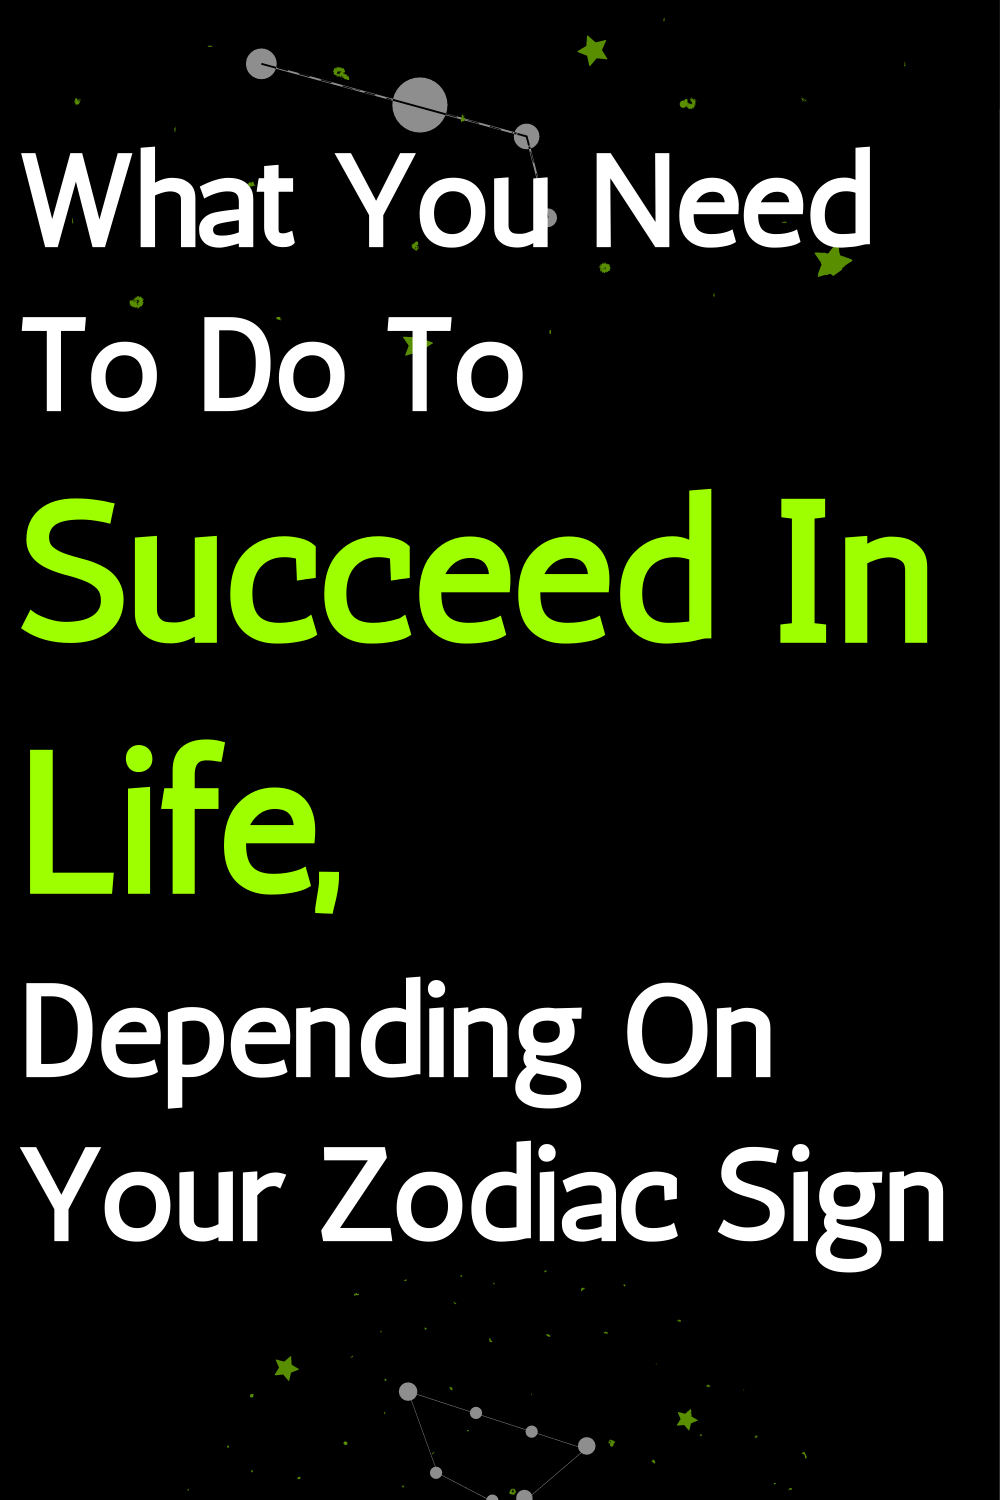 What To Expect In The Near Future, Depending On Your Zodiac Sign